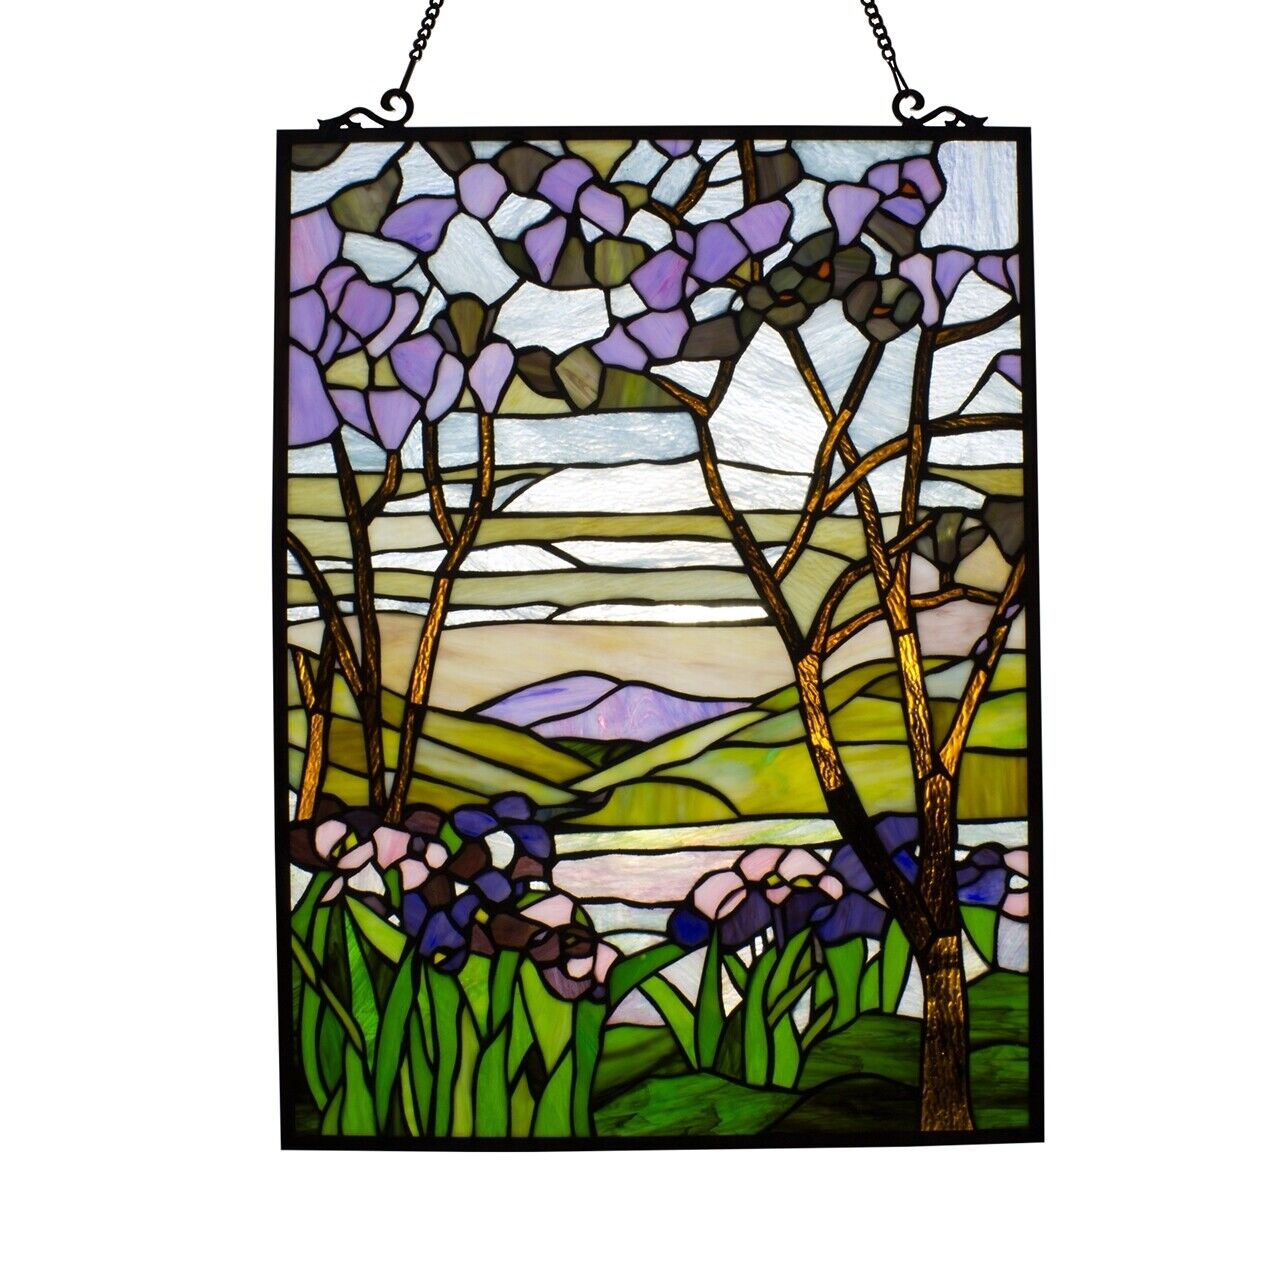 25" Floral Stained Glass Hanging Window Pane Suncatcher